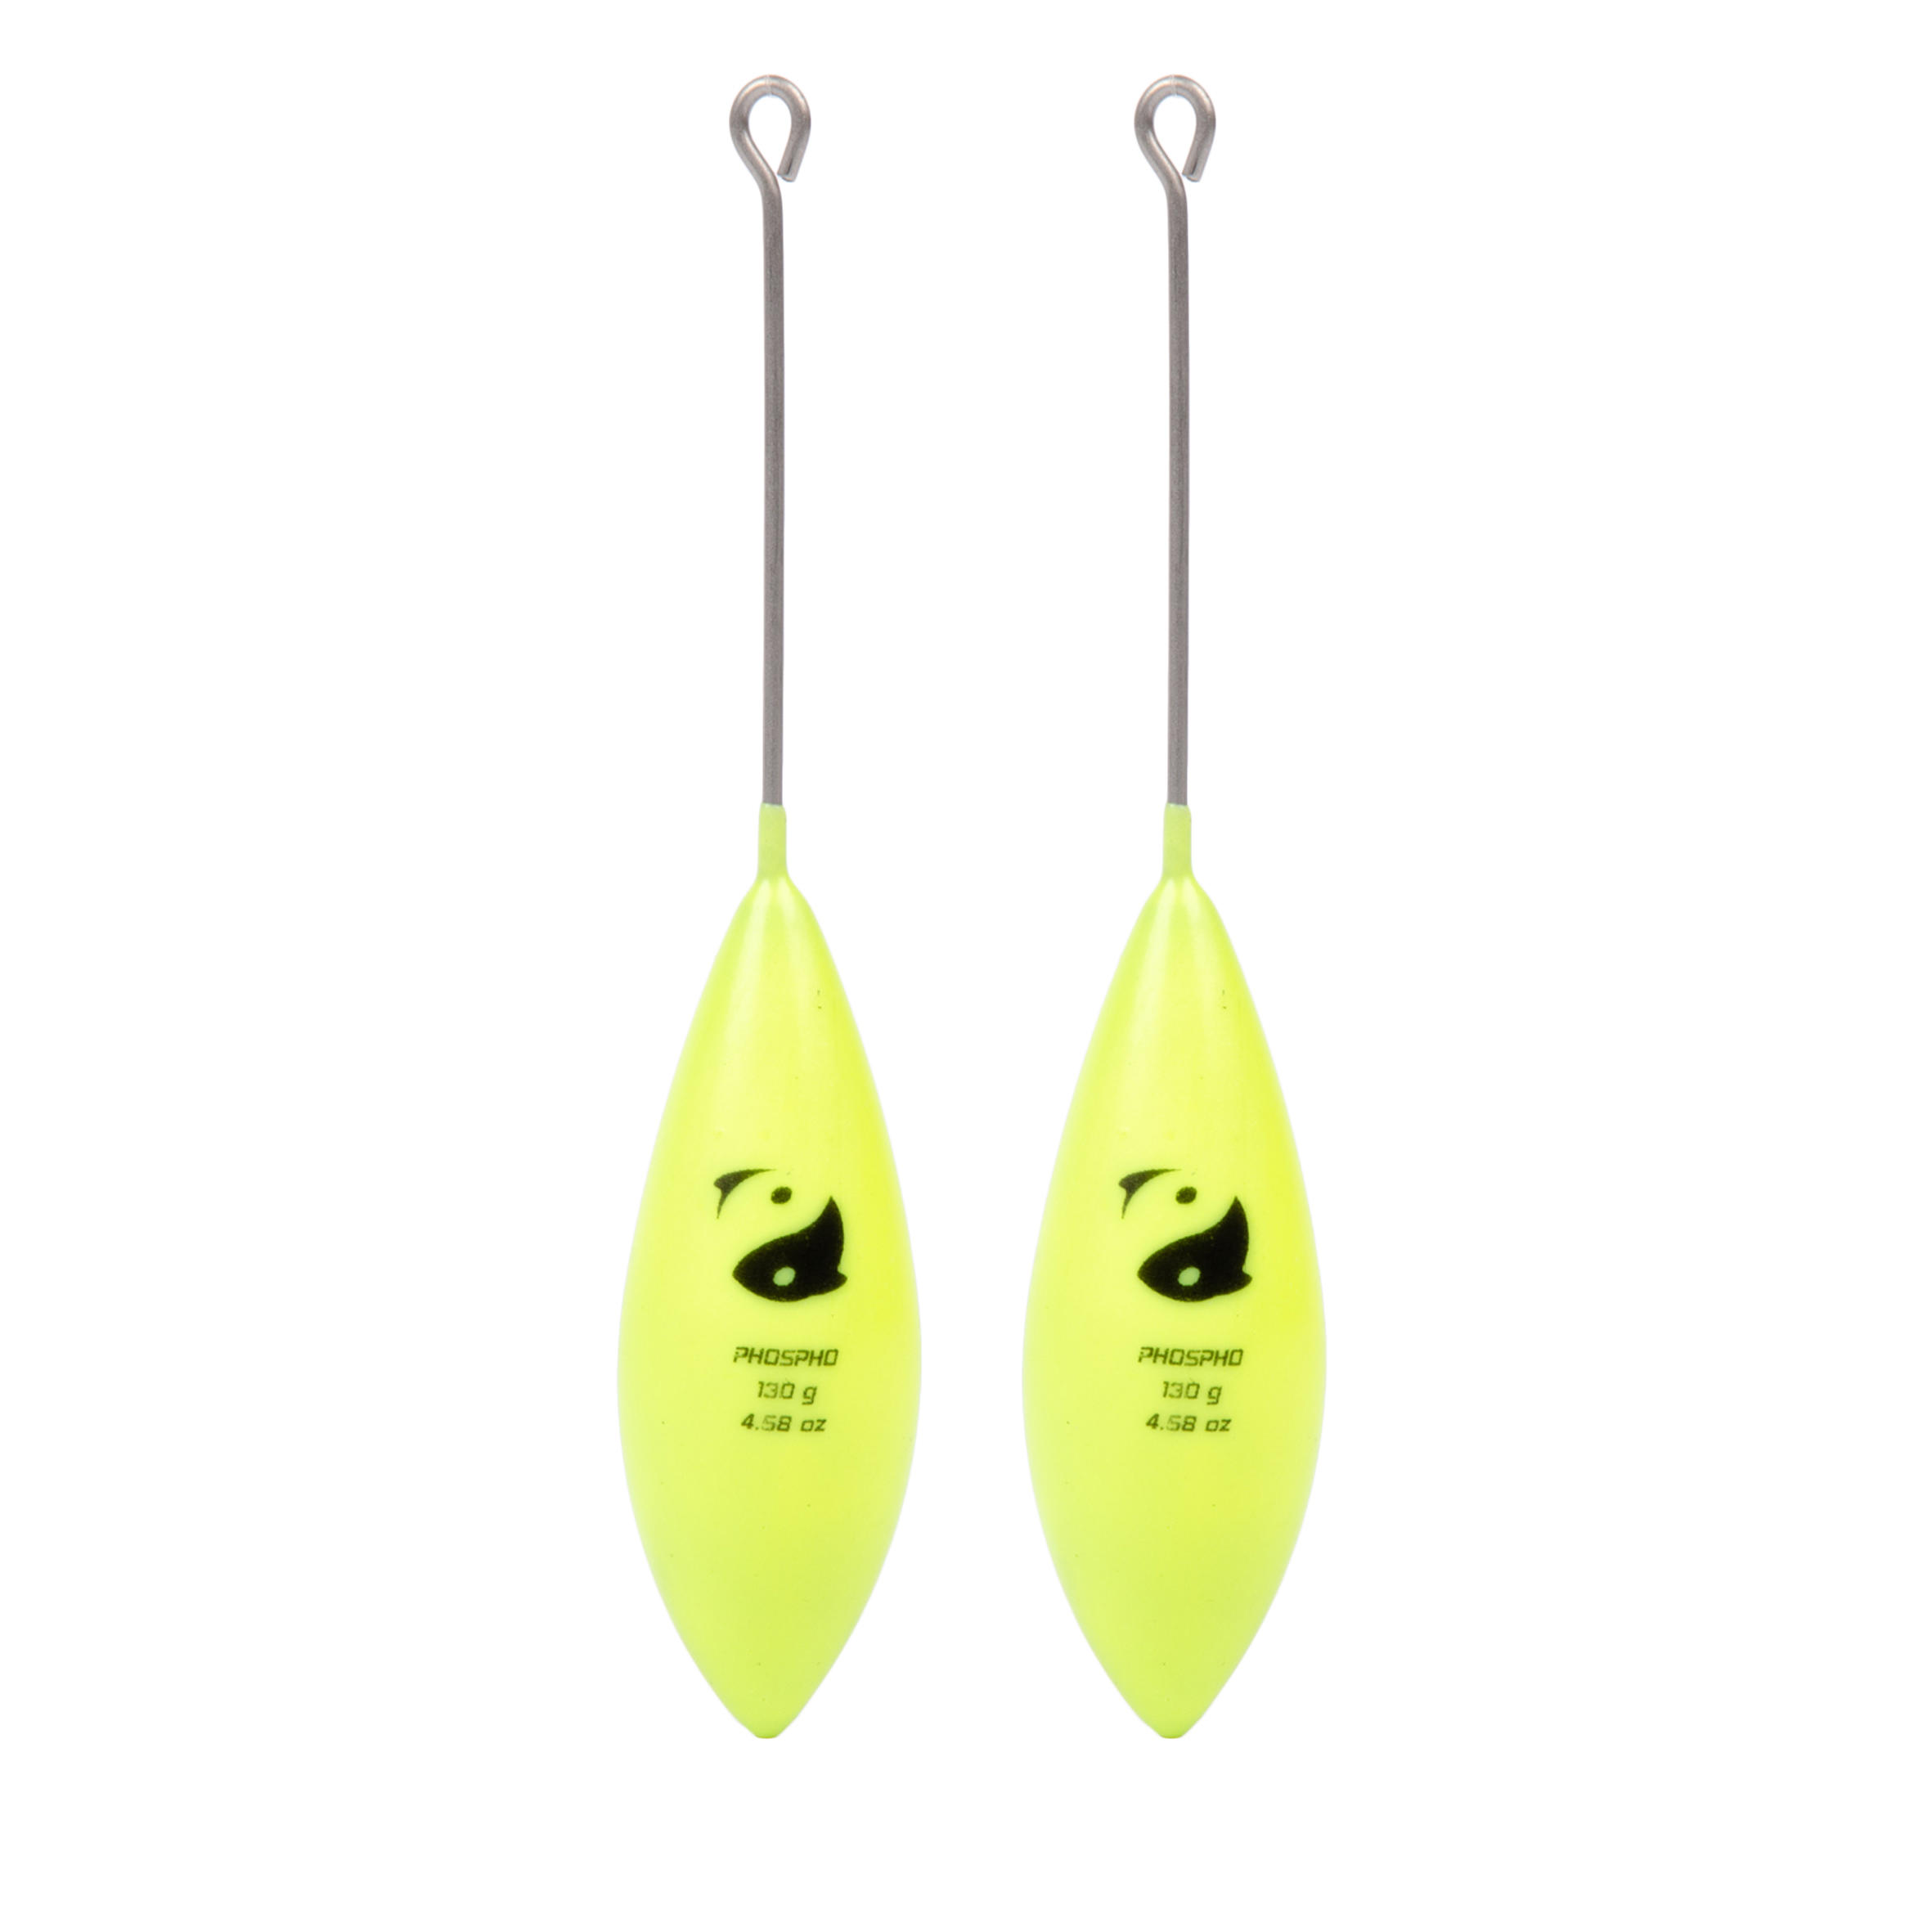 Fishing Surfcasting Bomb Sinker with Long Tail x2 - Phosphorescent Yellow 9/10